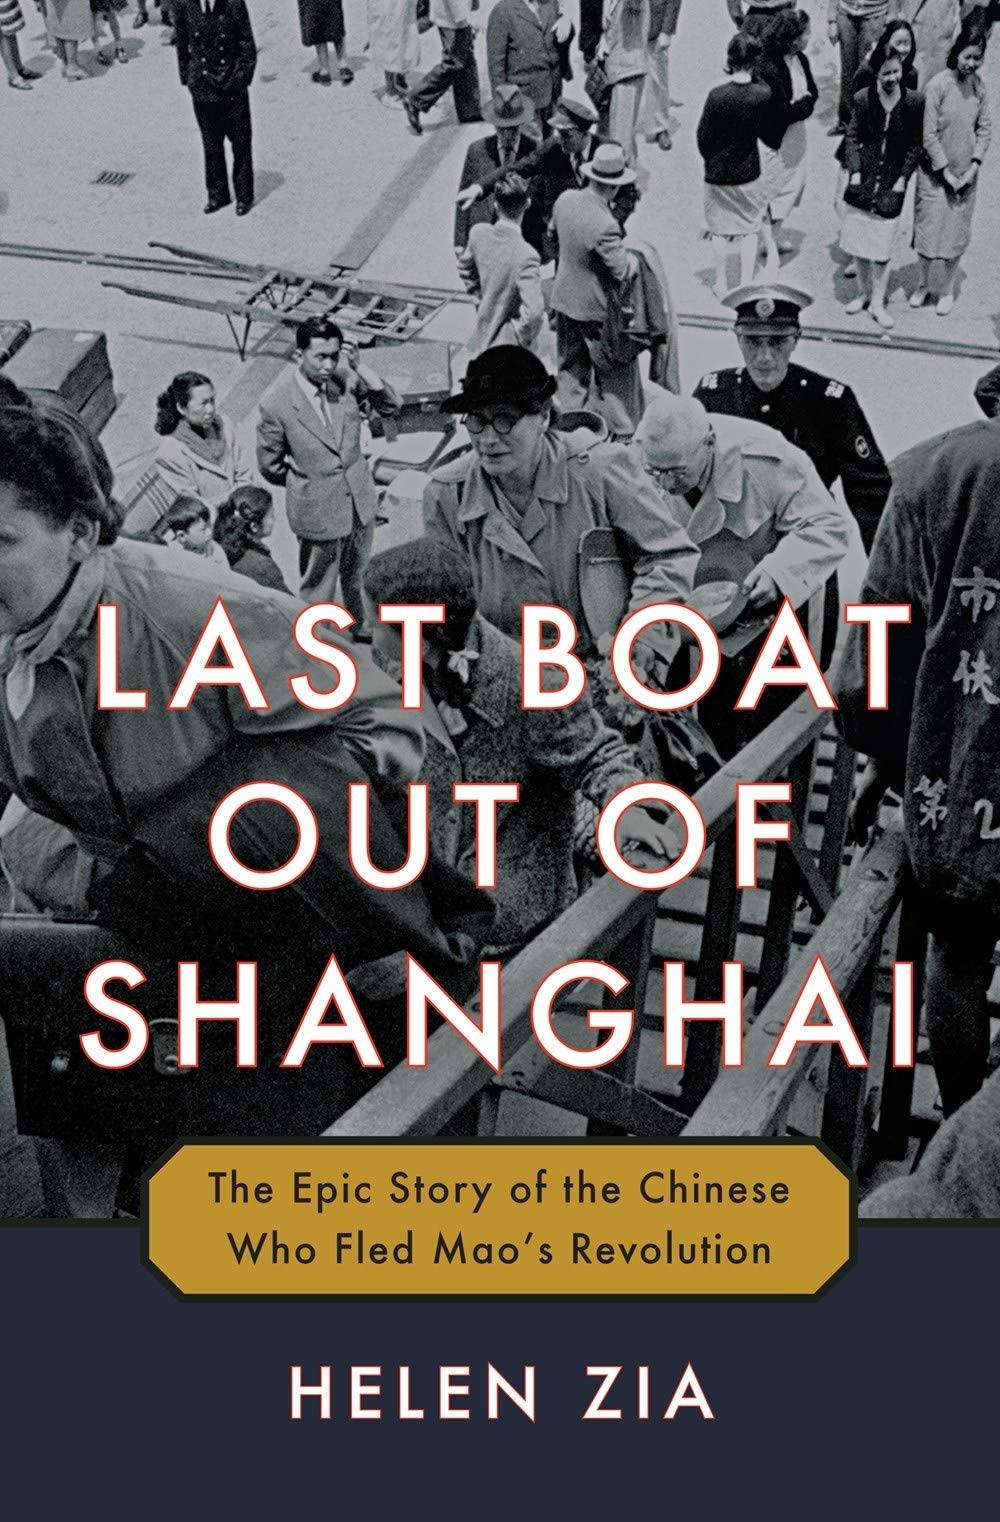 "Last Boat out of Shanghai" book cover with black and white photo of people climbing onto a large boat.